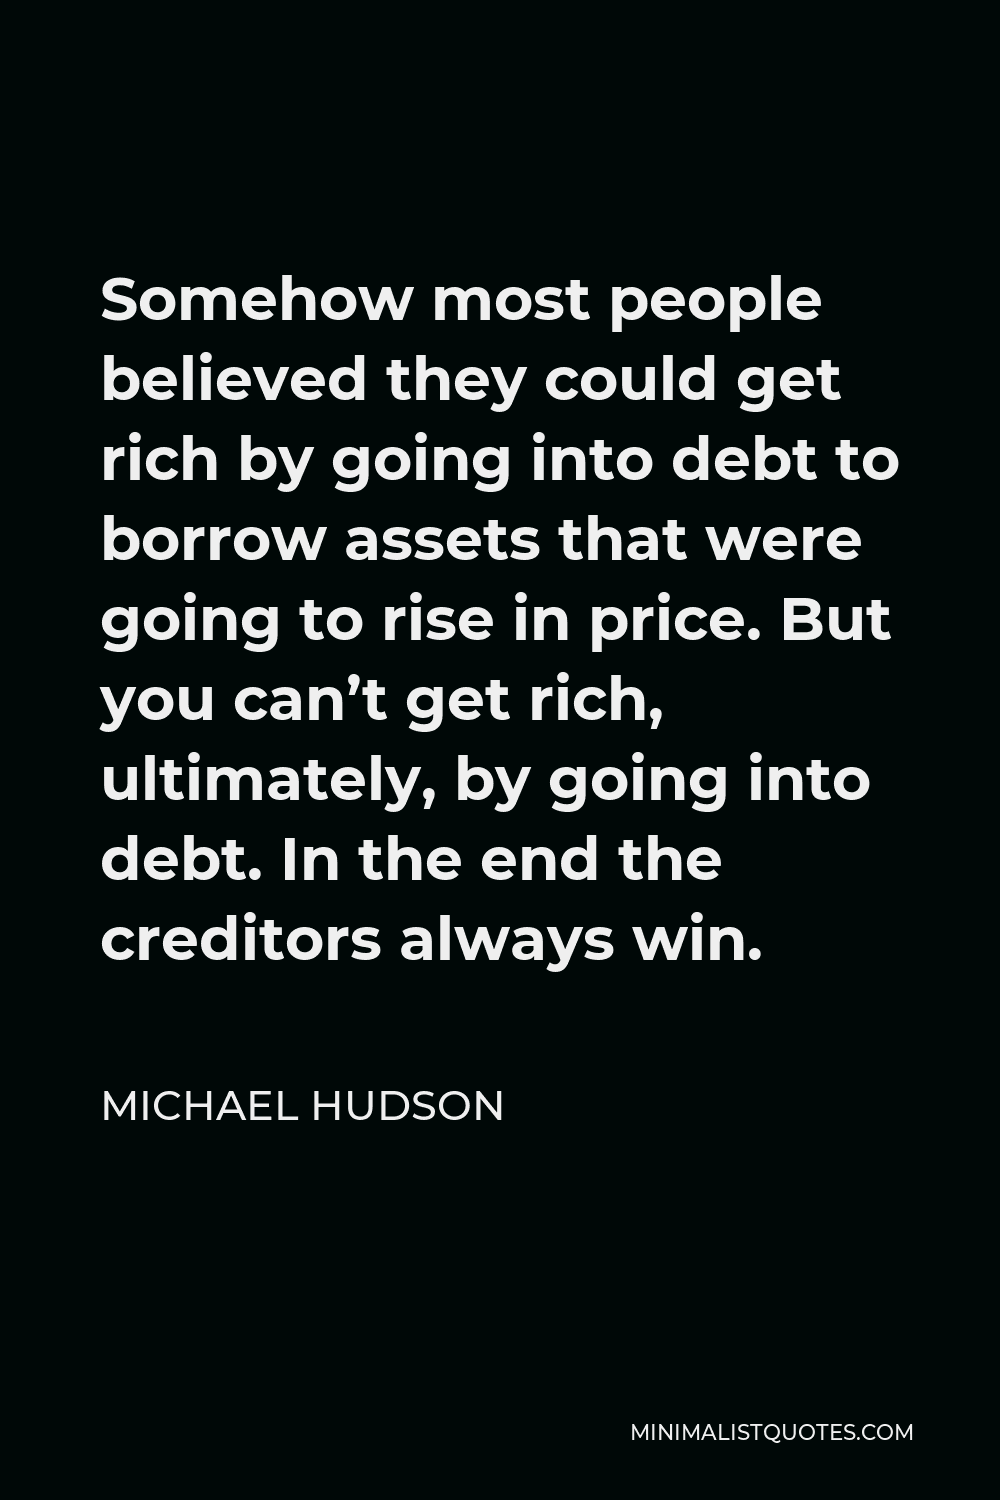 Michael Hudson Quote - Somehow most people believed they could get rich by going into debt to borrow assets that were going to rise in price. But you can’t get rich, ultimately, by going into debt. In the end the creditors always win.